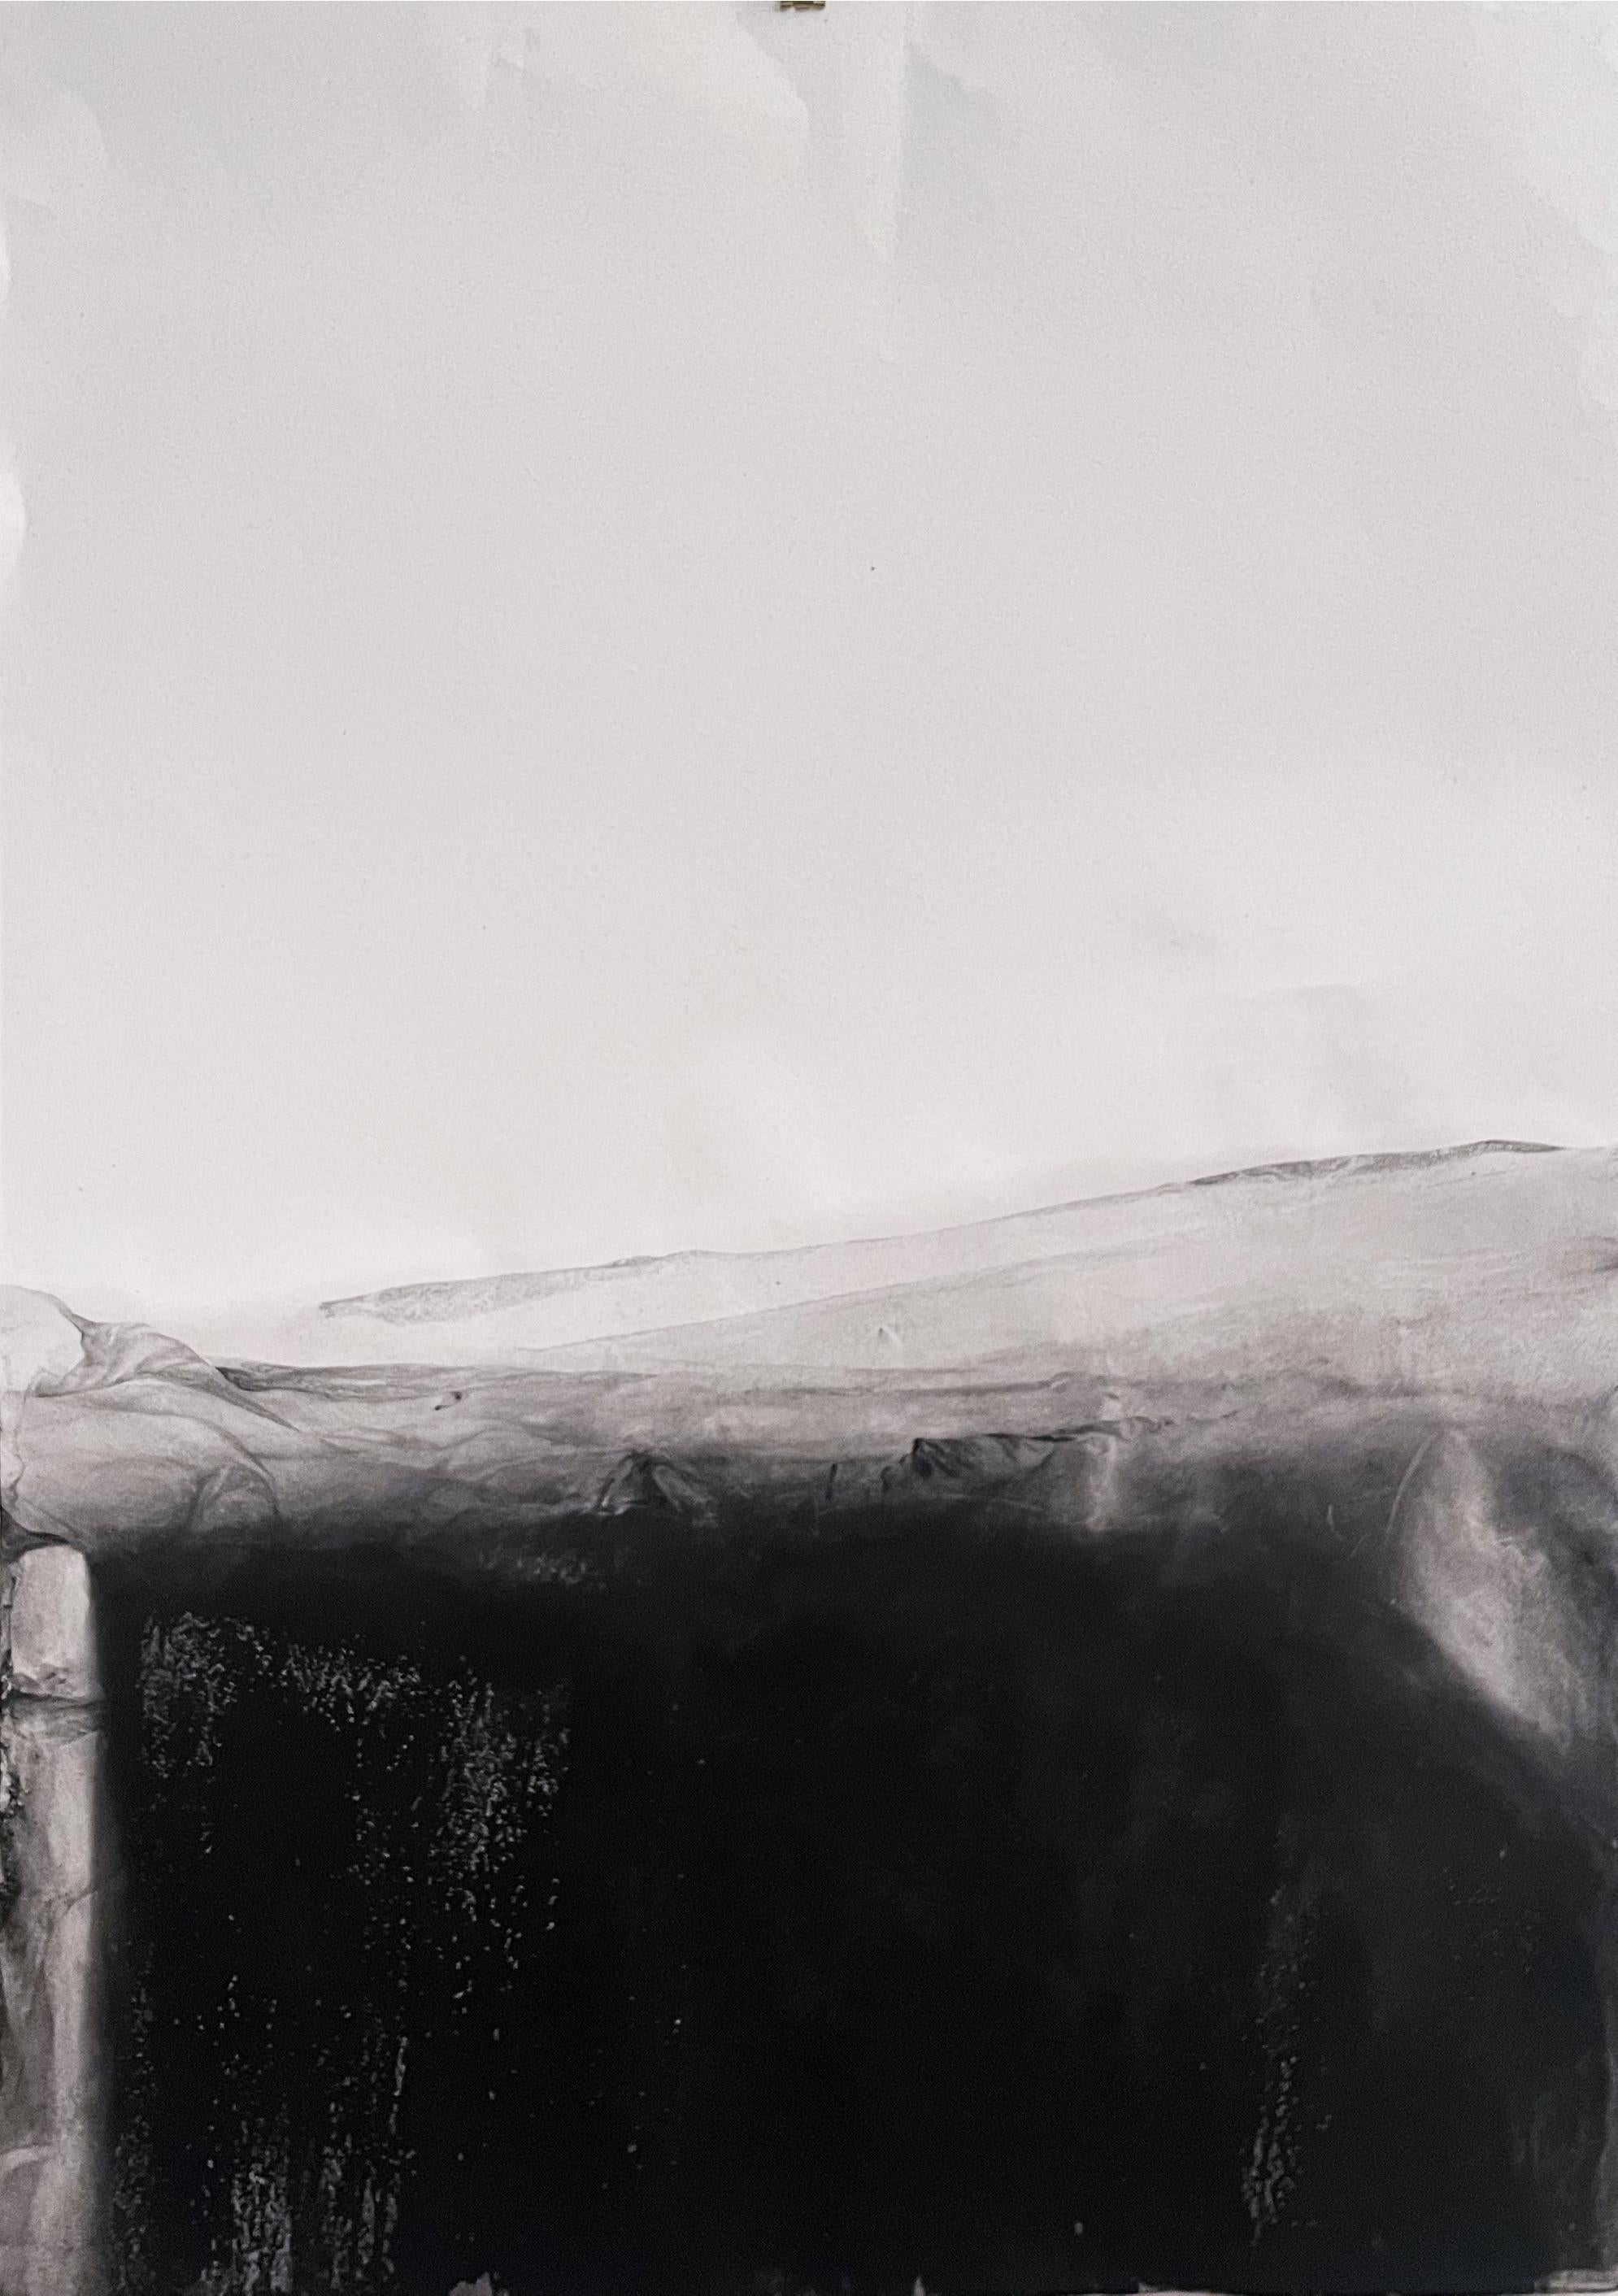 Marilina Marchica Landscape Art - "Landscape" Black and White  Paint on Paper Large Size  made in Italy